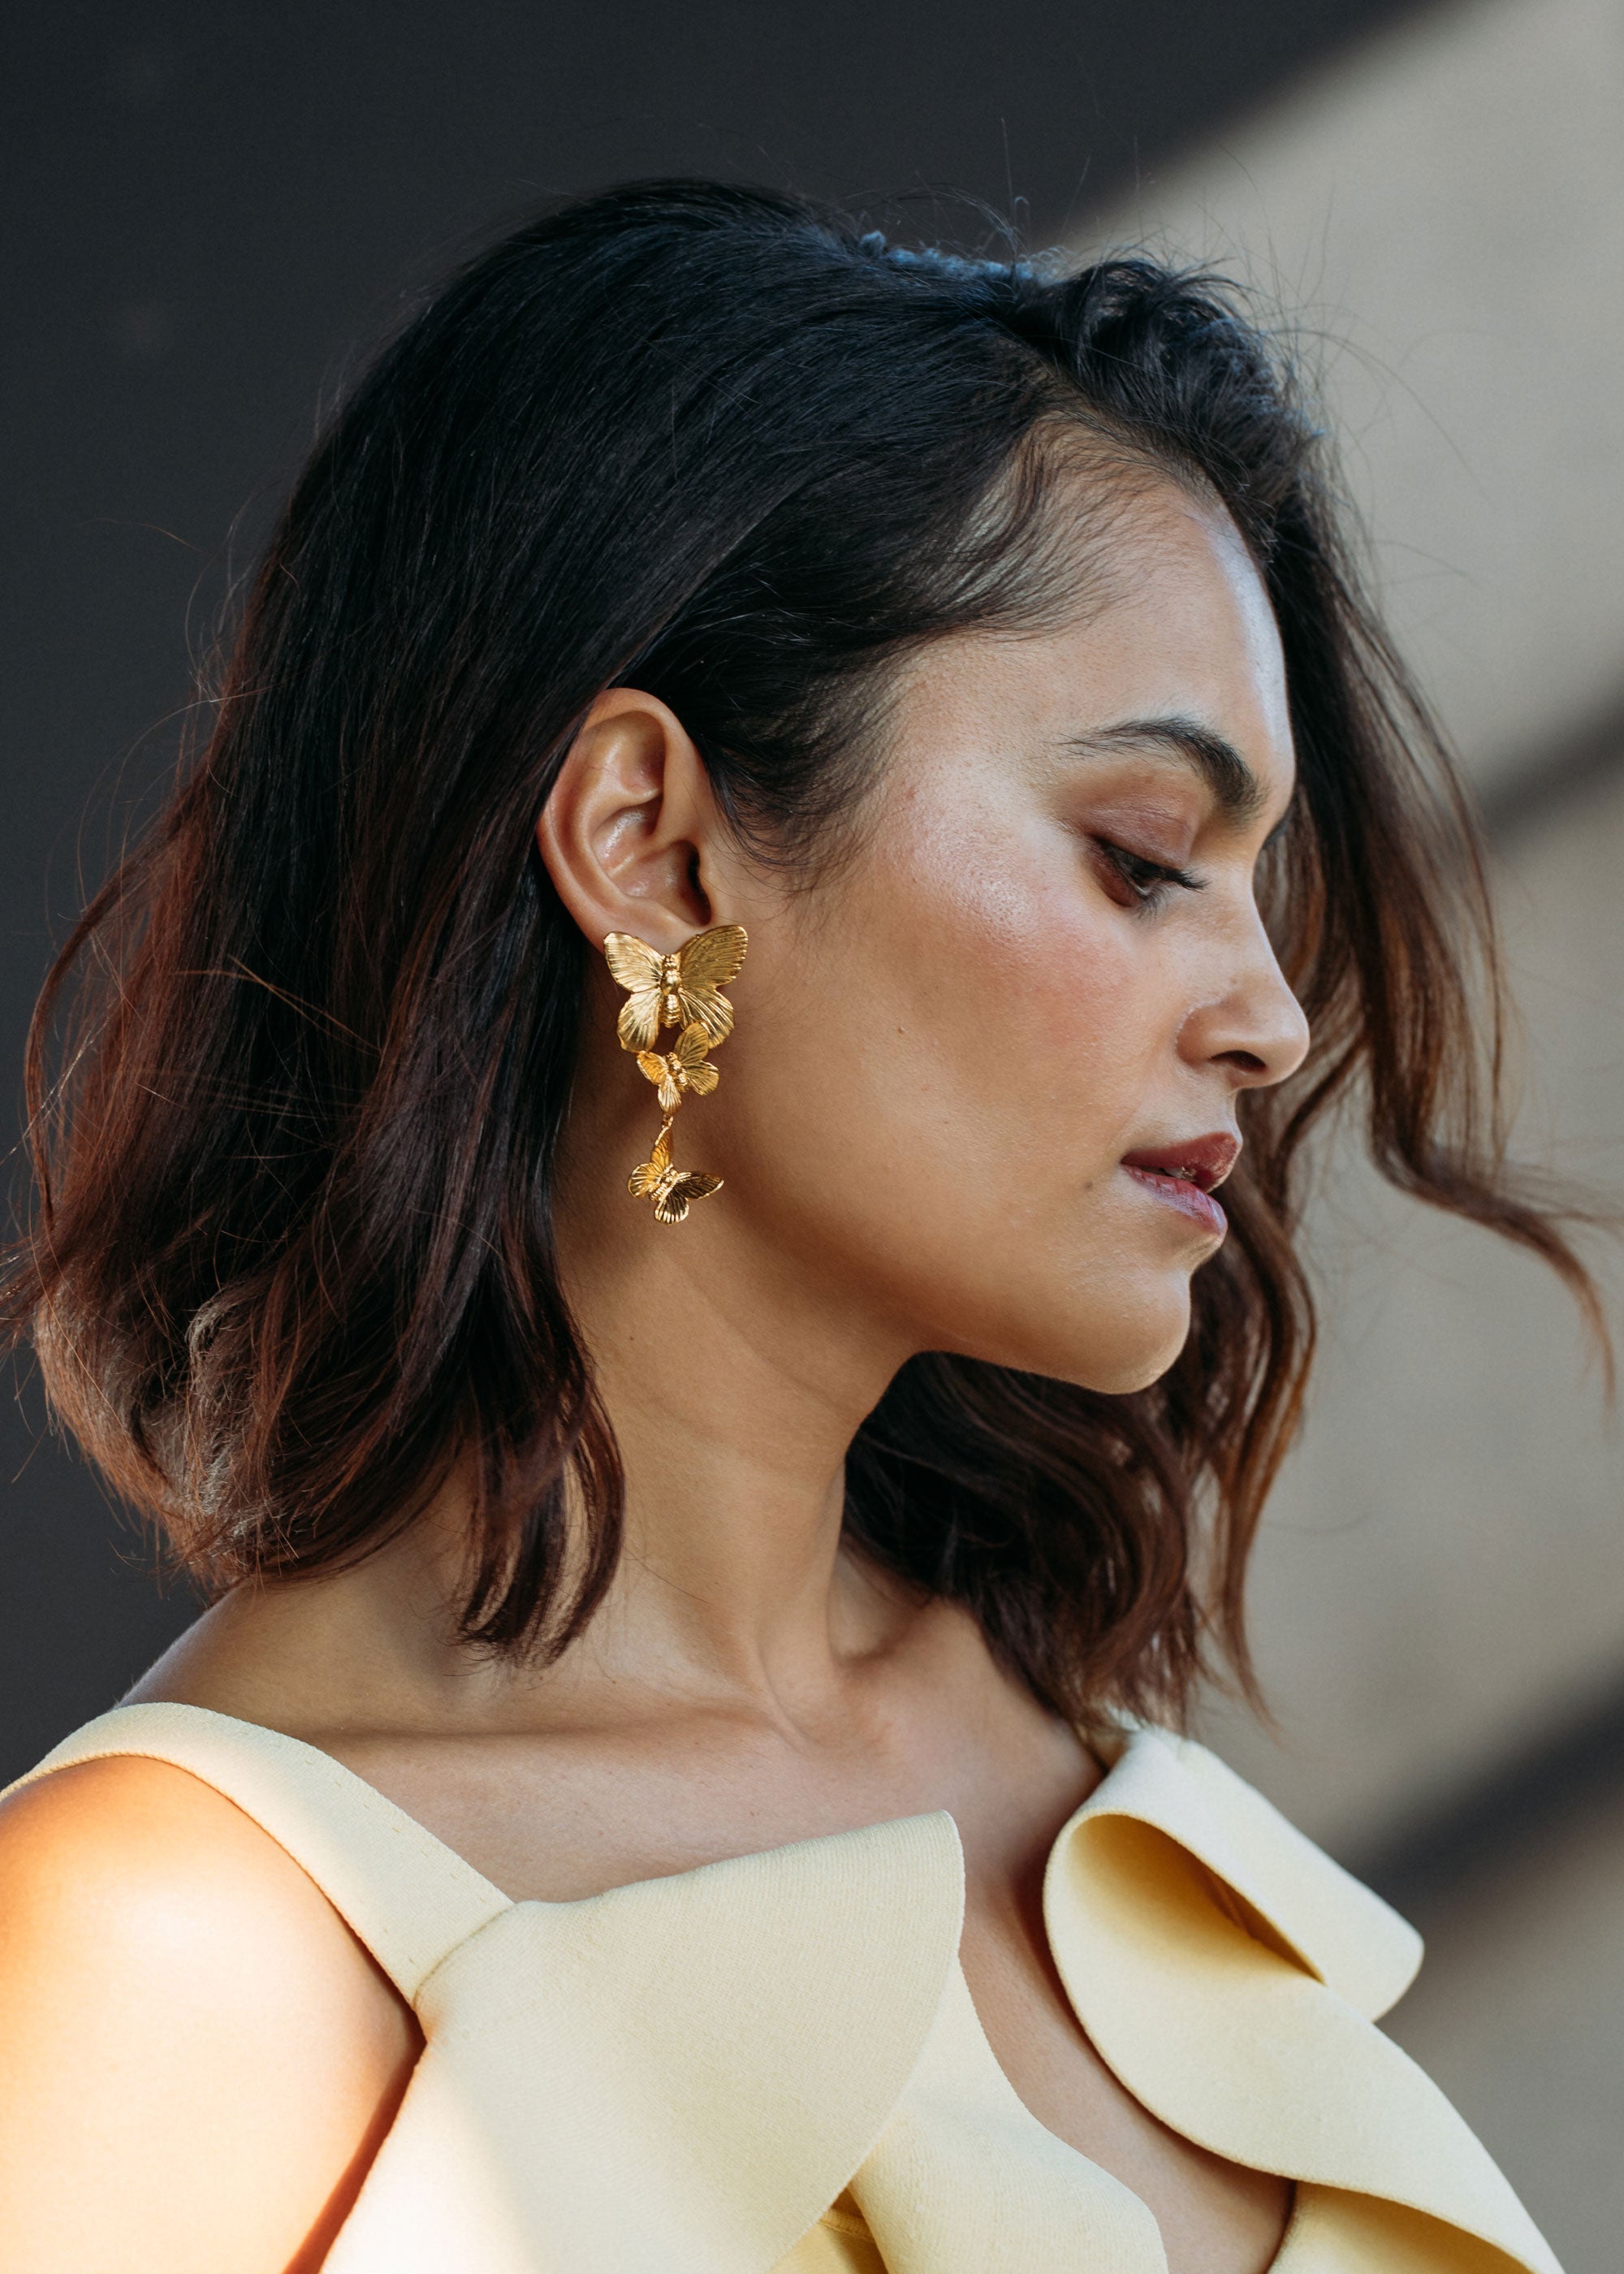 Short Hair Cuts and Long Earrings.Catching Fire! | Pearls Jewellery Online